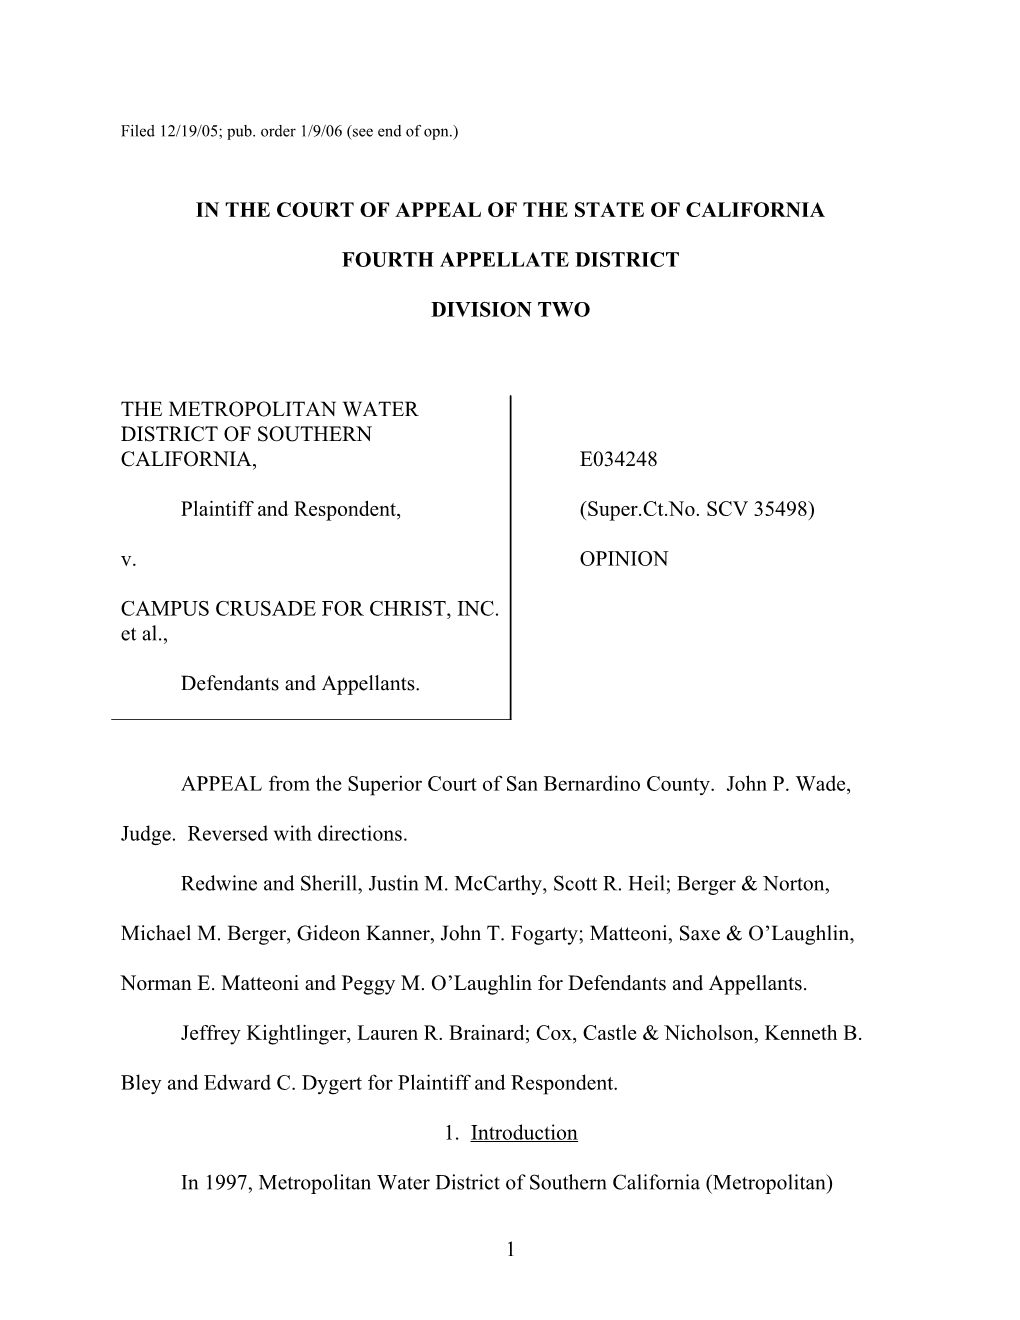 In the Court of Appeal of the State of California s6